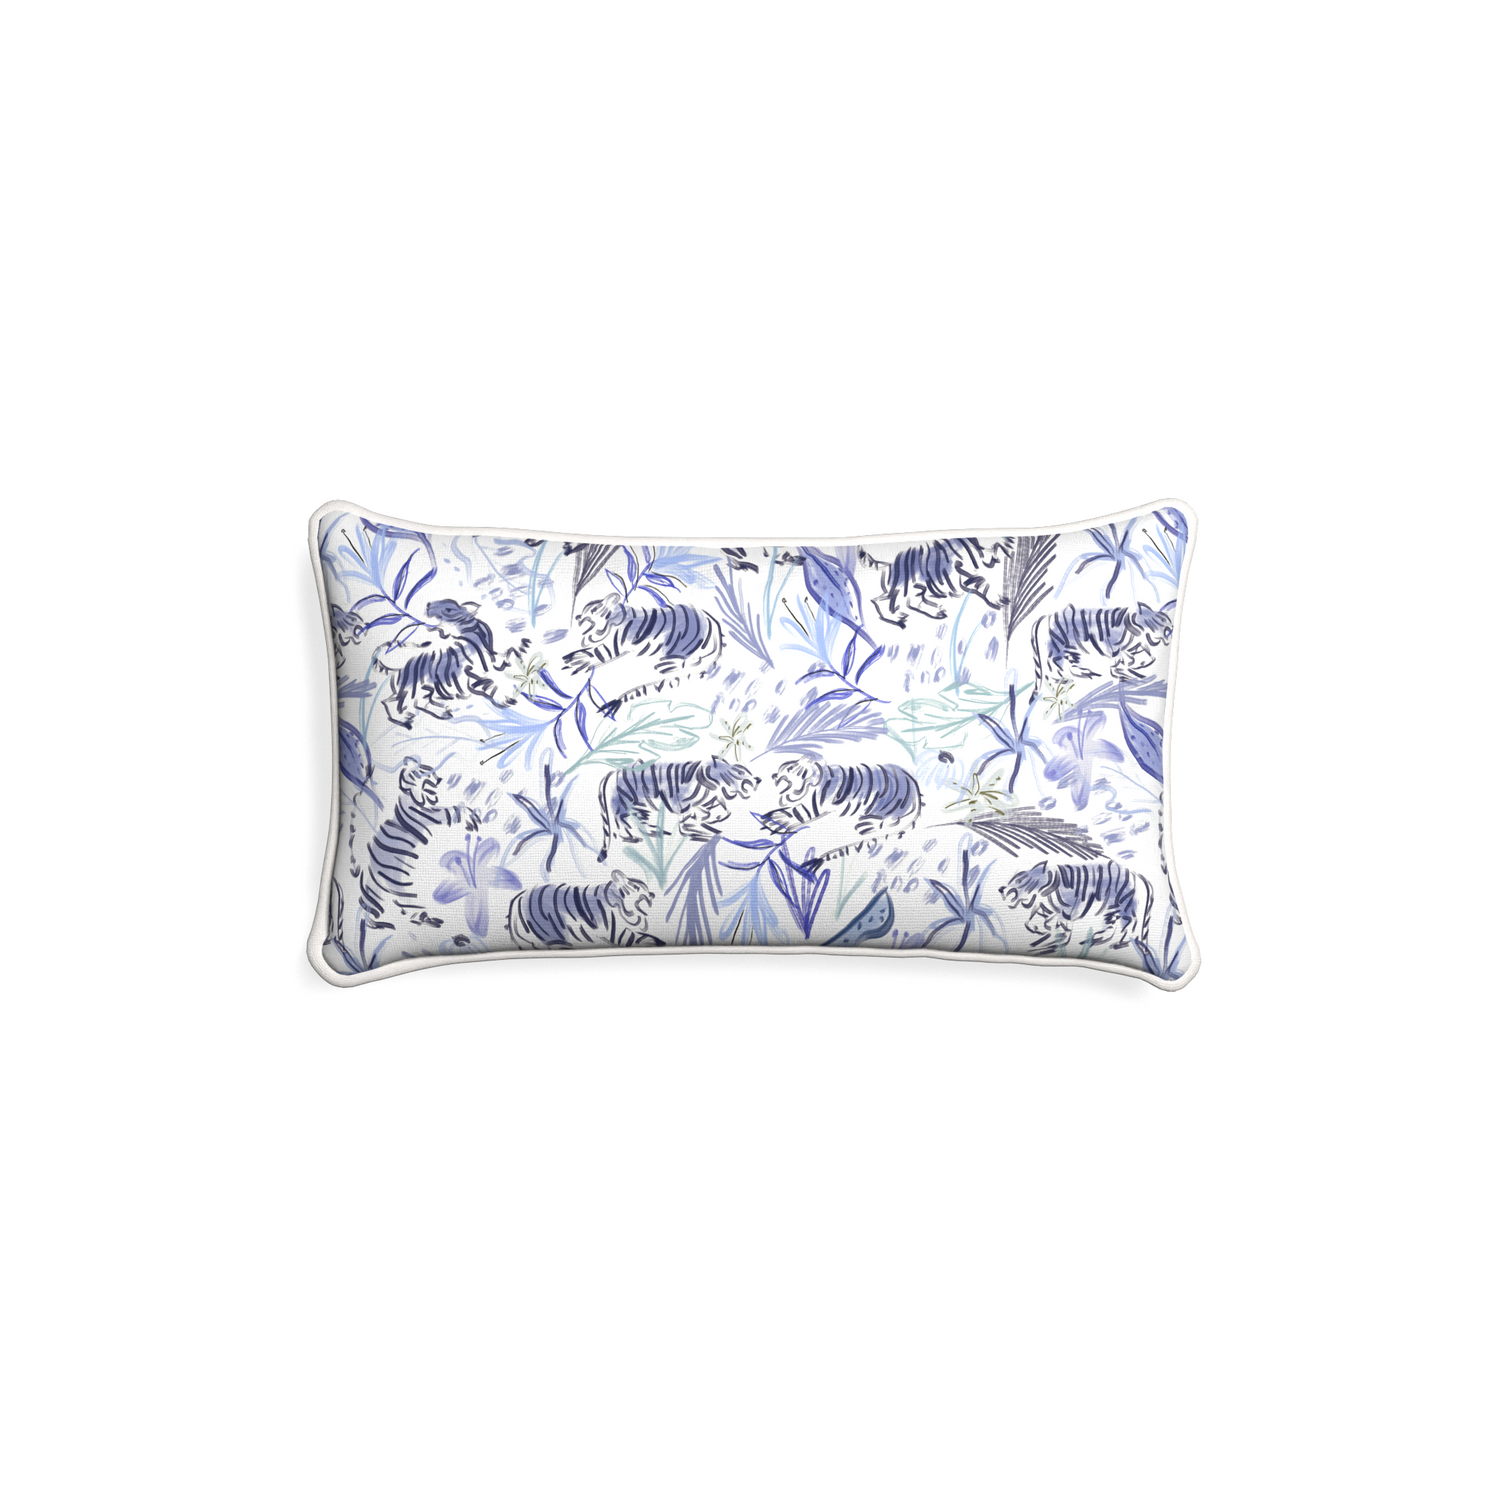 Petite-lumbar frida blue custom blue with intricate tiger designpillow with snow piping on white background